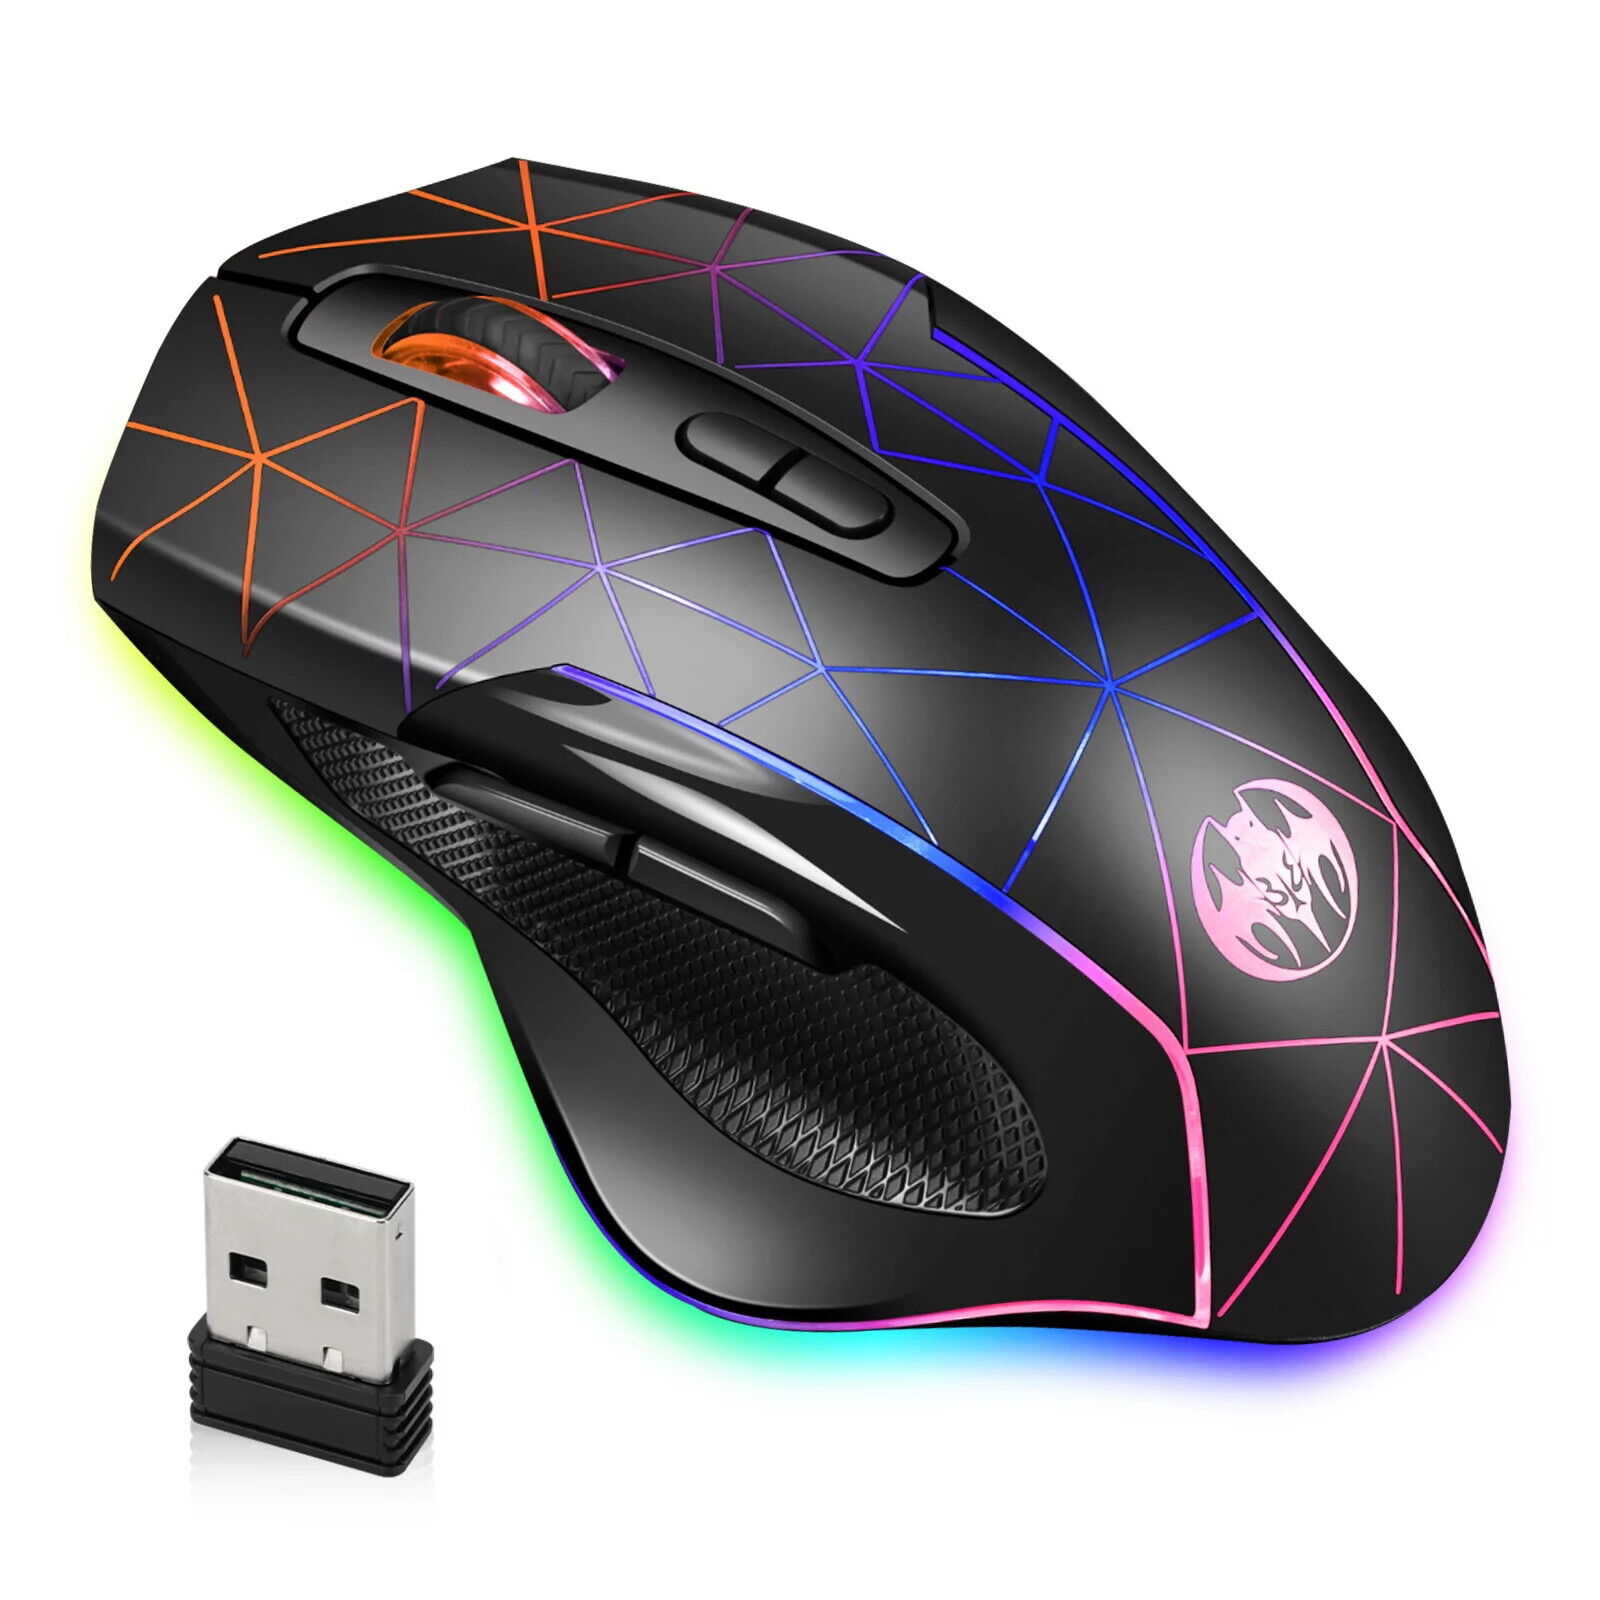 2.4GHz Wireless Gaming Mouse 7 Color USB Rechargeable Optical Mice for PC Laptop